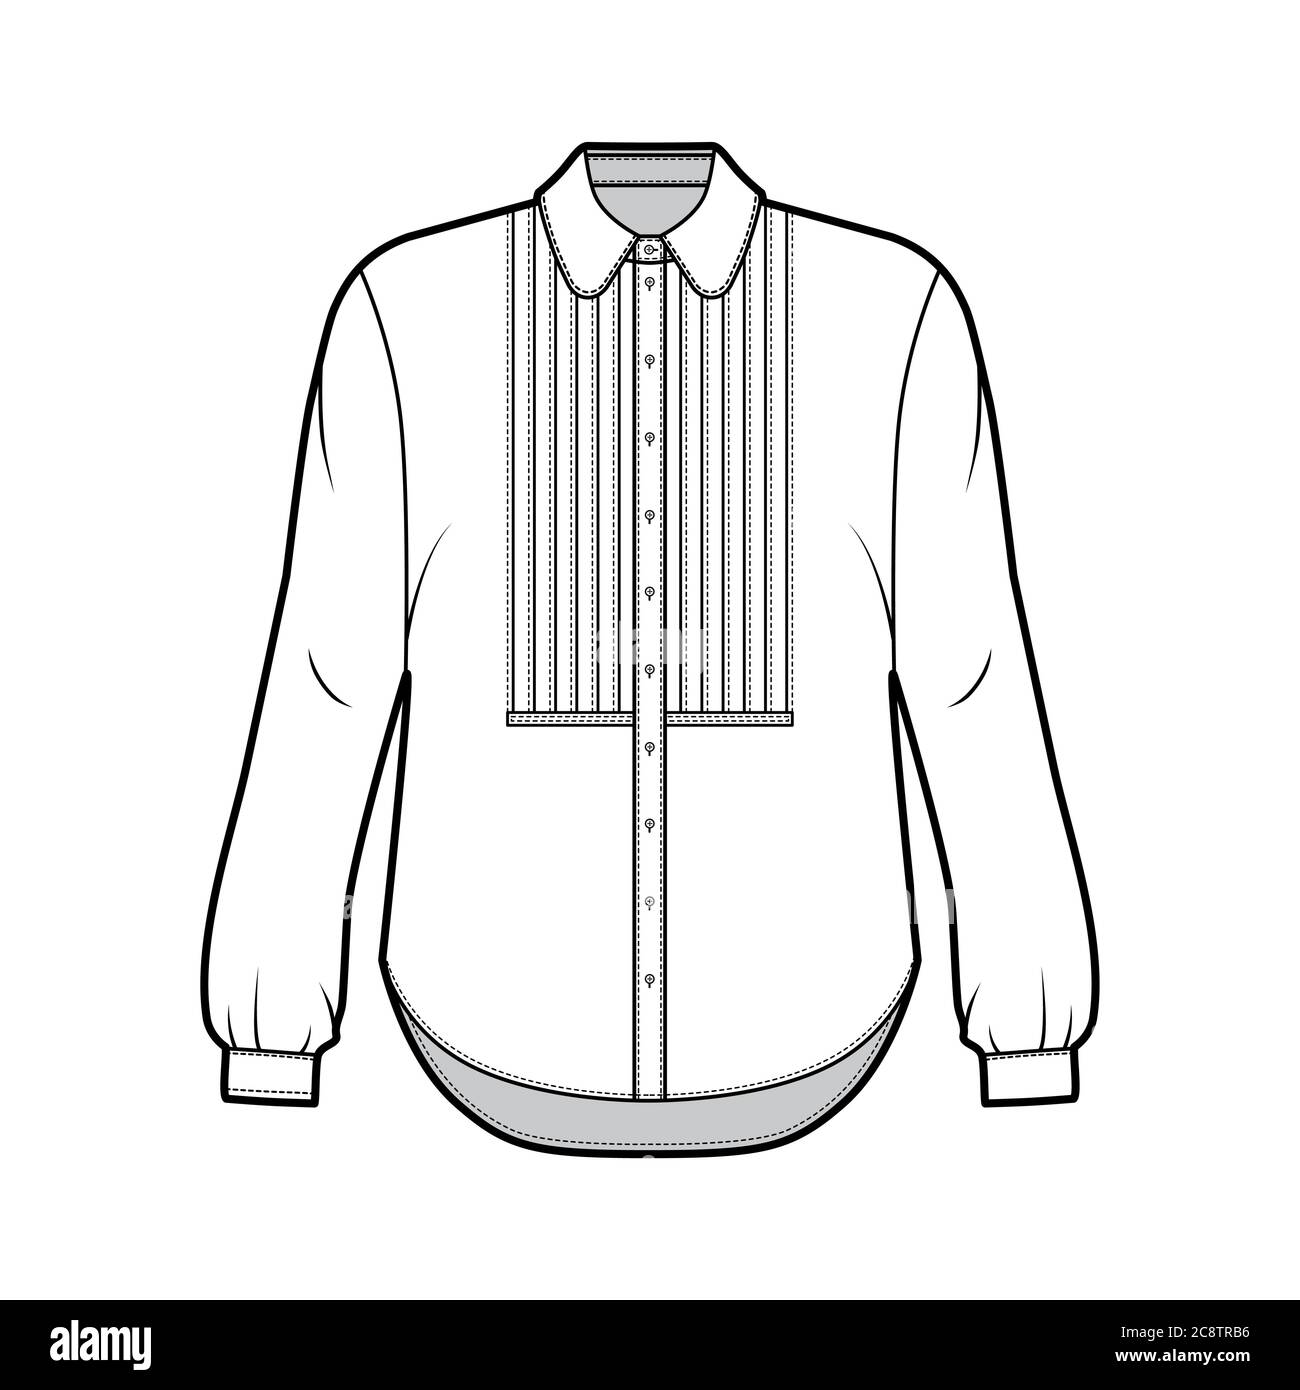 Shirt technical fashion illustration with bib, button down front ...